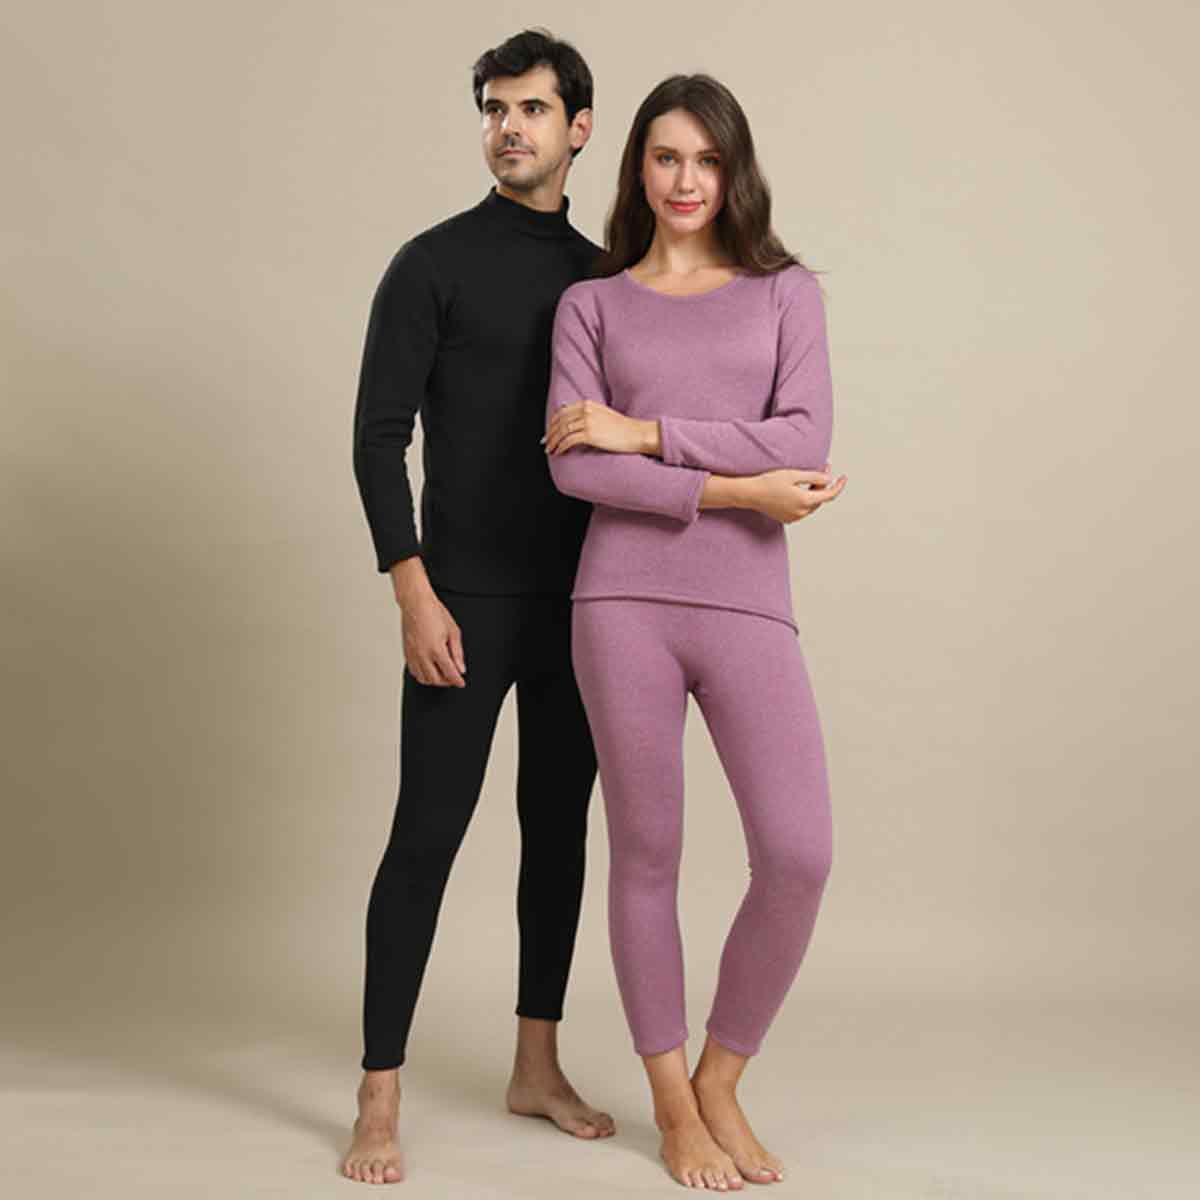 Mens Thermal Underwear Set：Fleece Lined Long Johns for Men Thermal Top and  Bottom Base Layer Cold Weather Thermals - XL